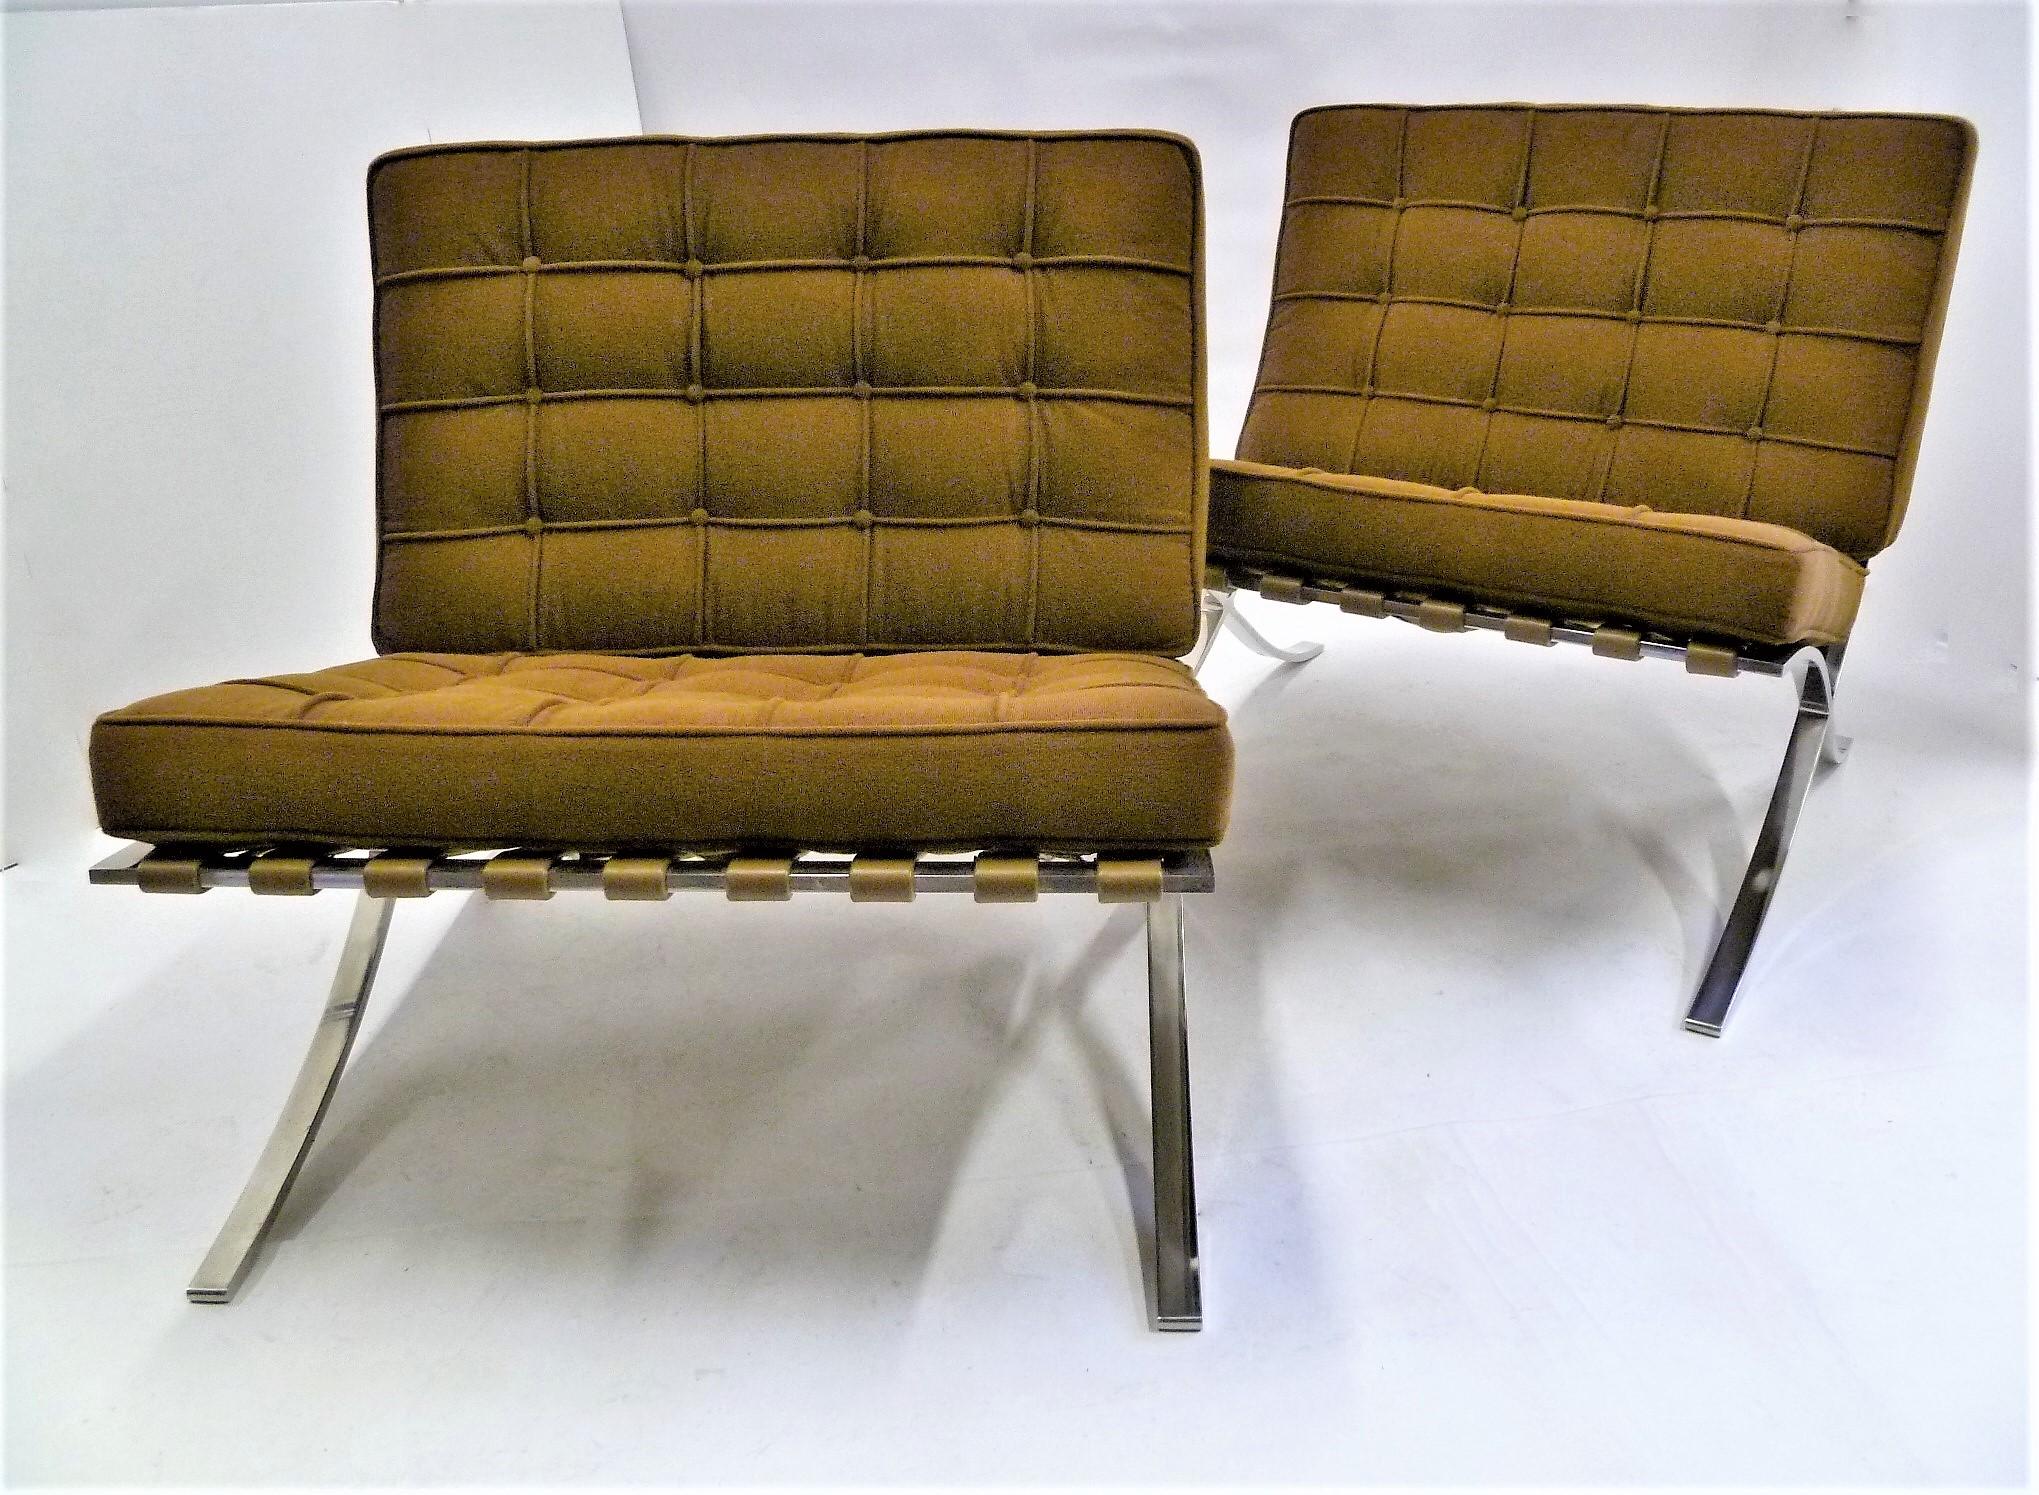 Pair of fine 1960s Knoll Barcelona chairs designed by Mies van der Rohe. This pair produced in the 1960s. Reupholstered in a Knoll Spencer in Caramel micro-loop cocoa brown fabric with original leather straps underneath. Original Knoll tag attached,